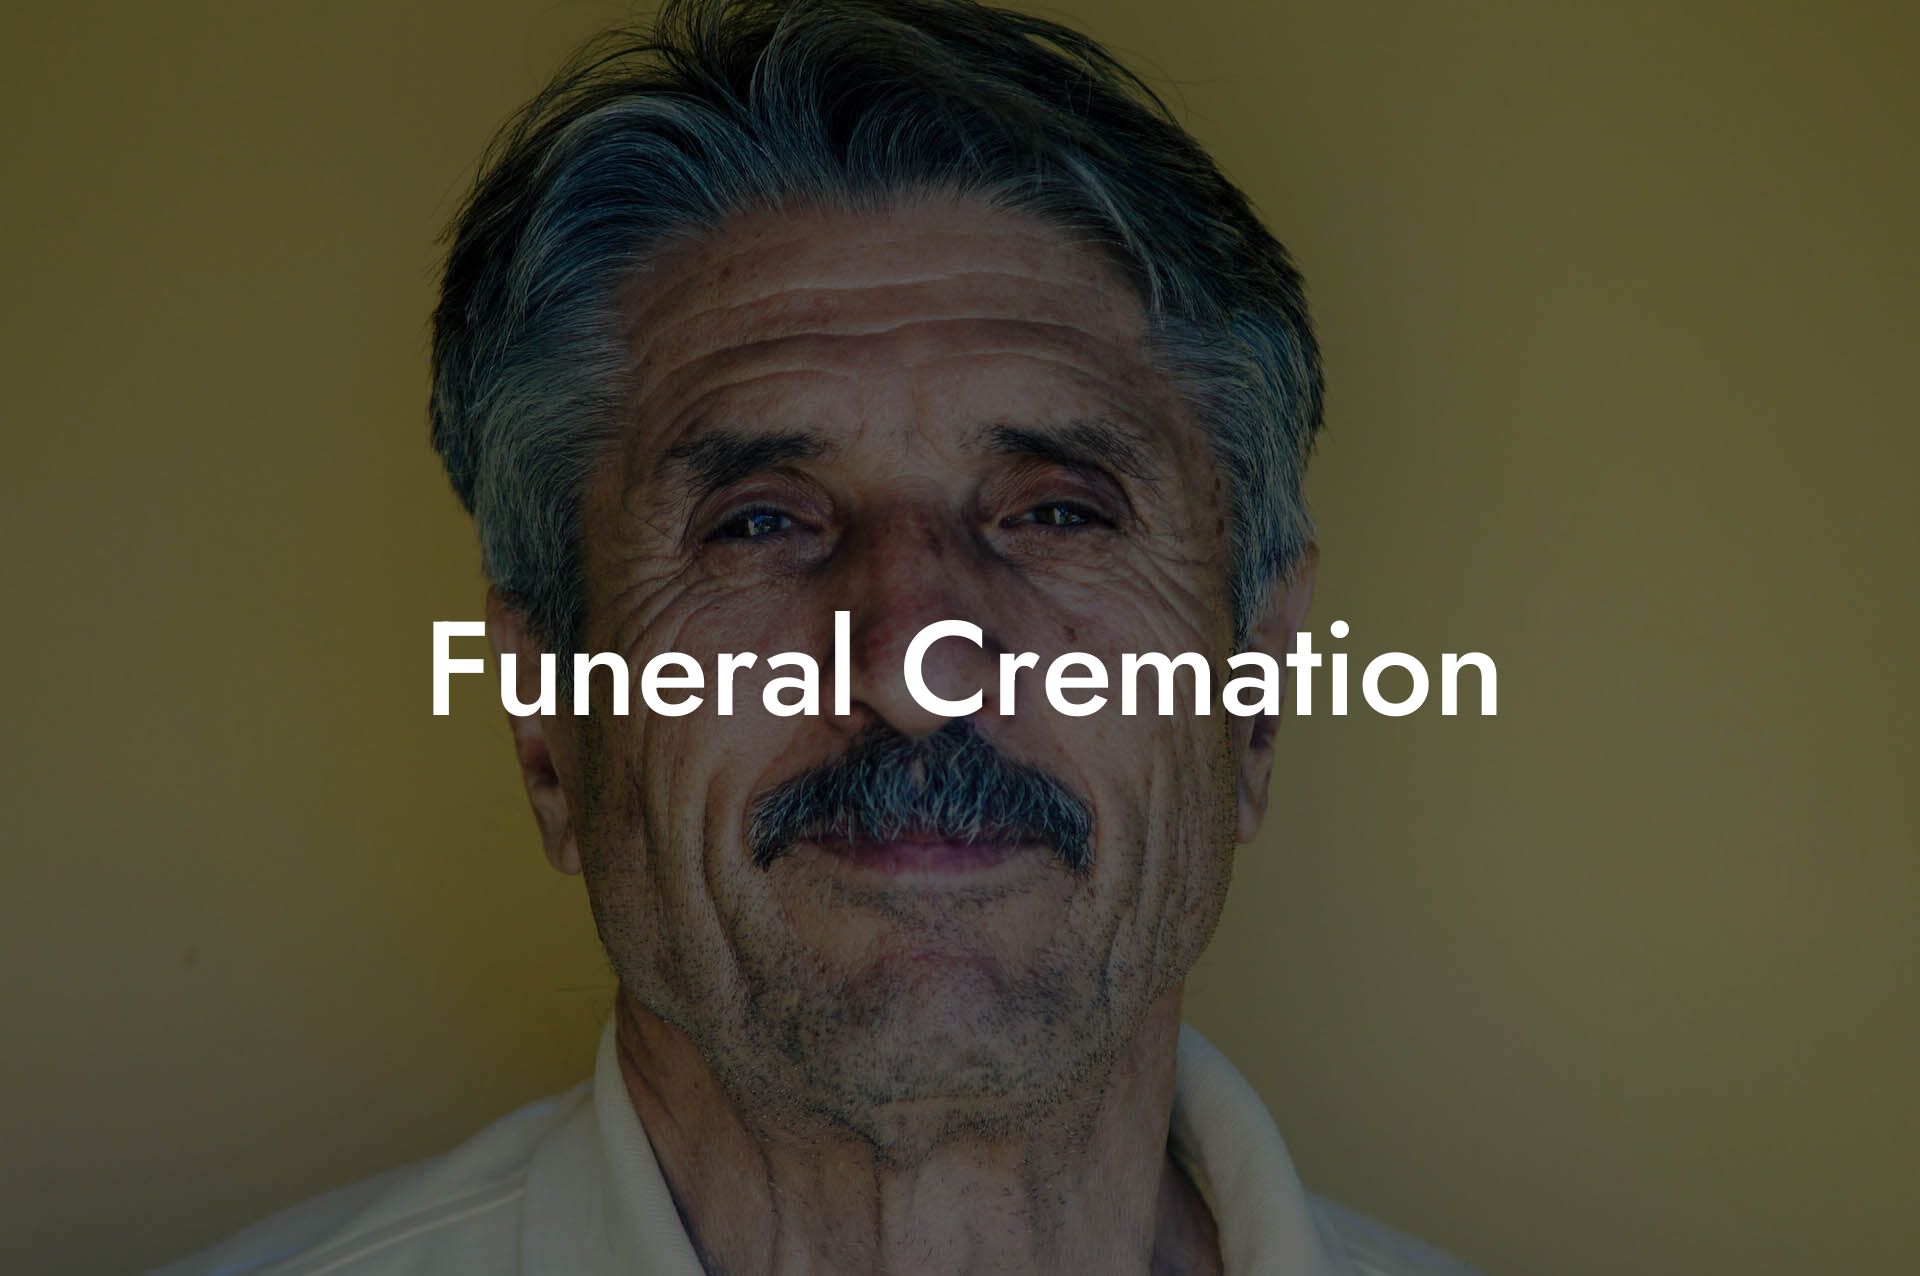 Funeral Cremation